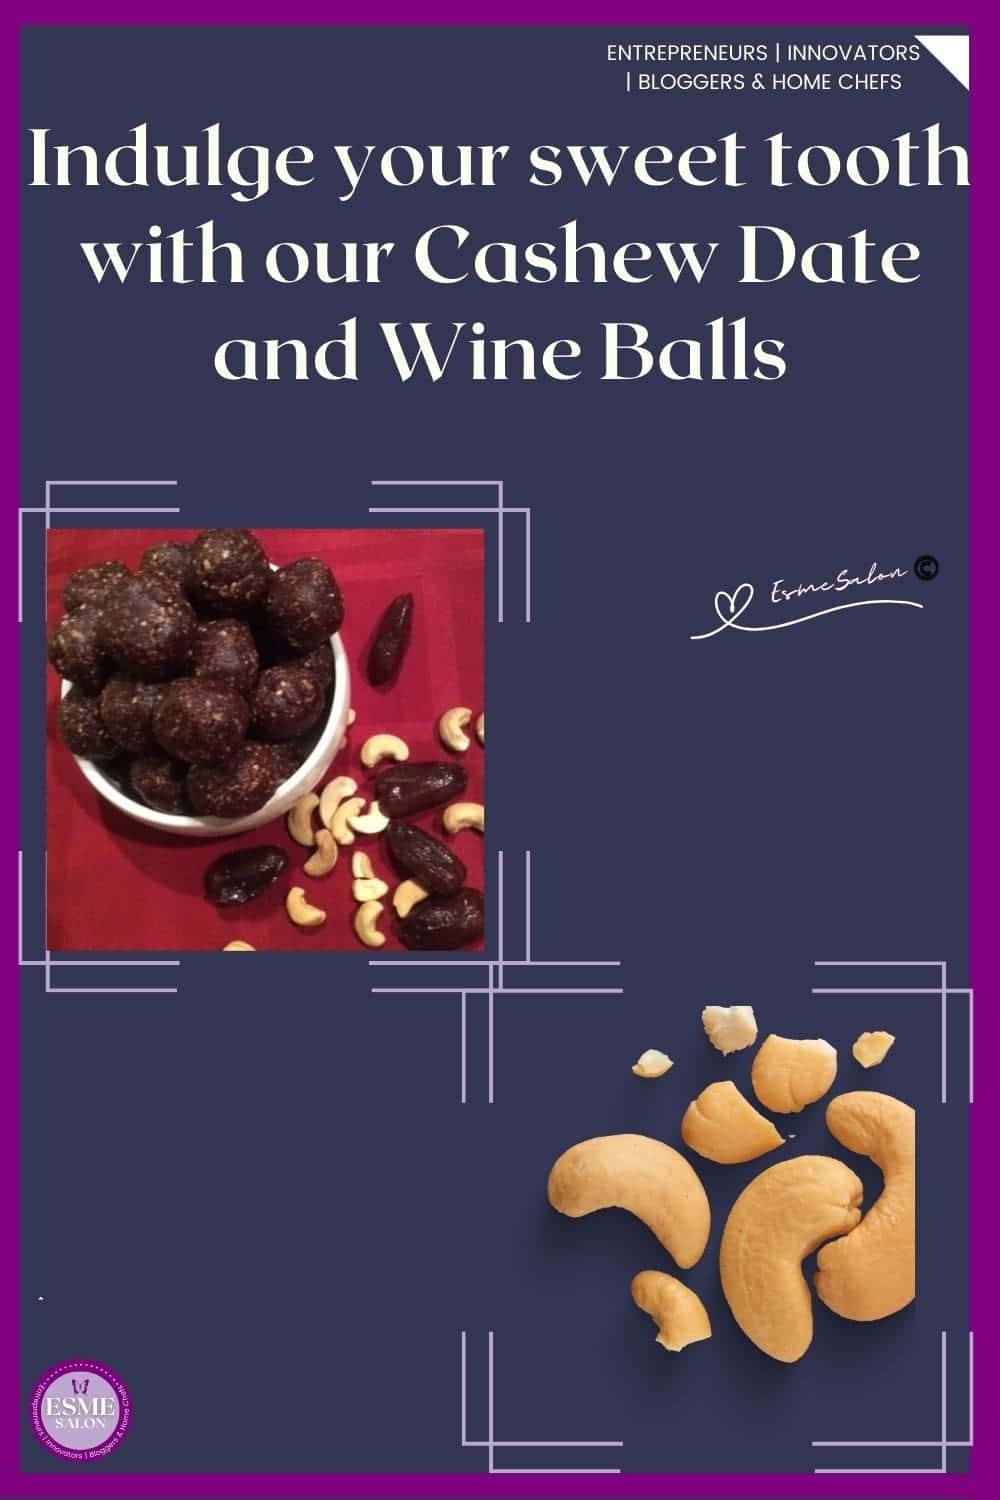 an image of Cashew Date and Wine Balls on a red background